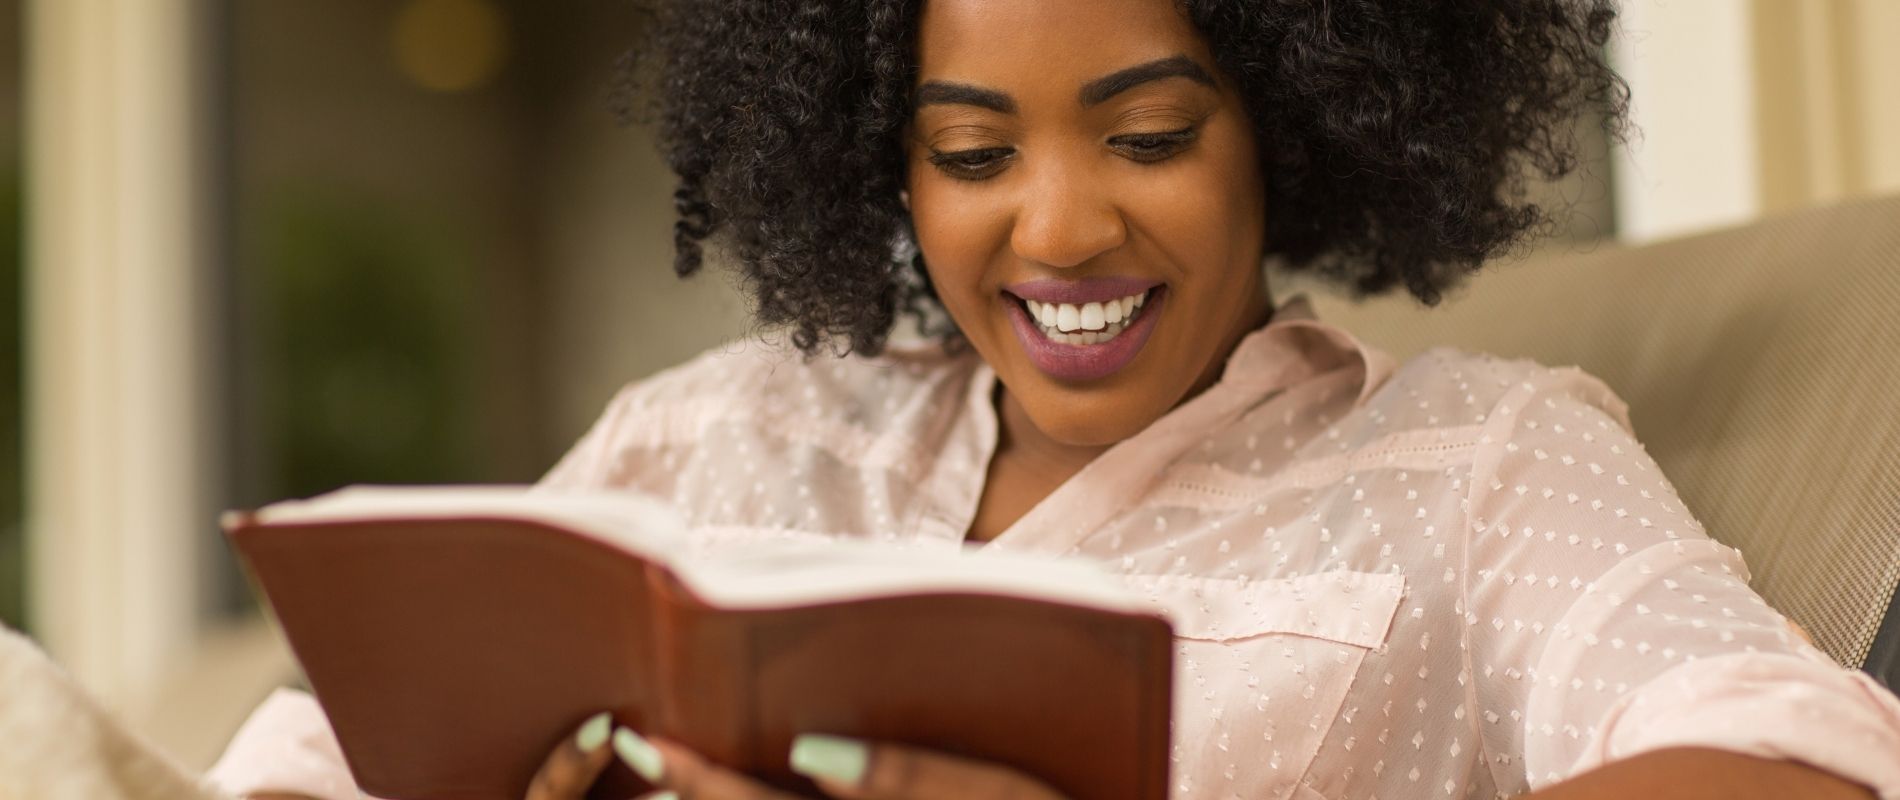 The Top Natural Hair Books Every Natural Should Read